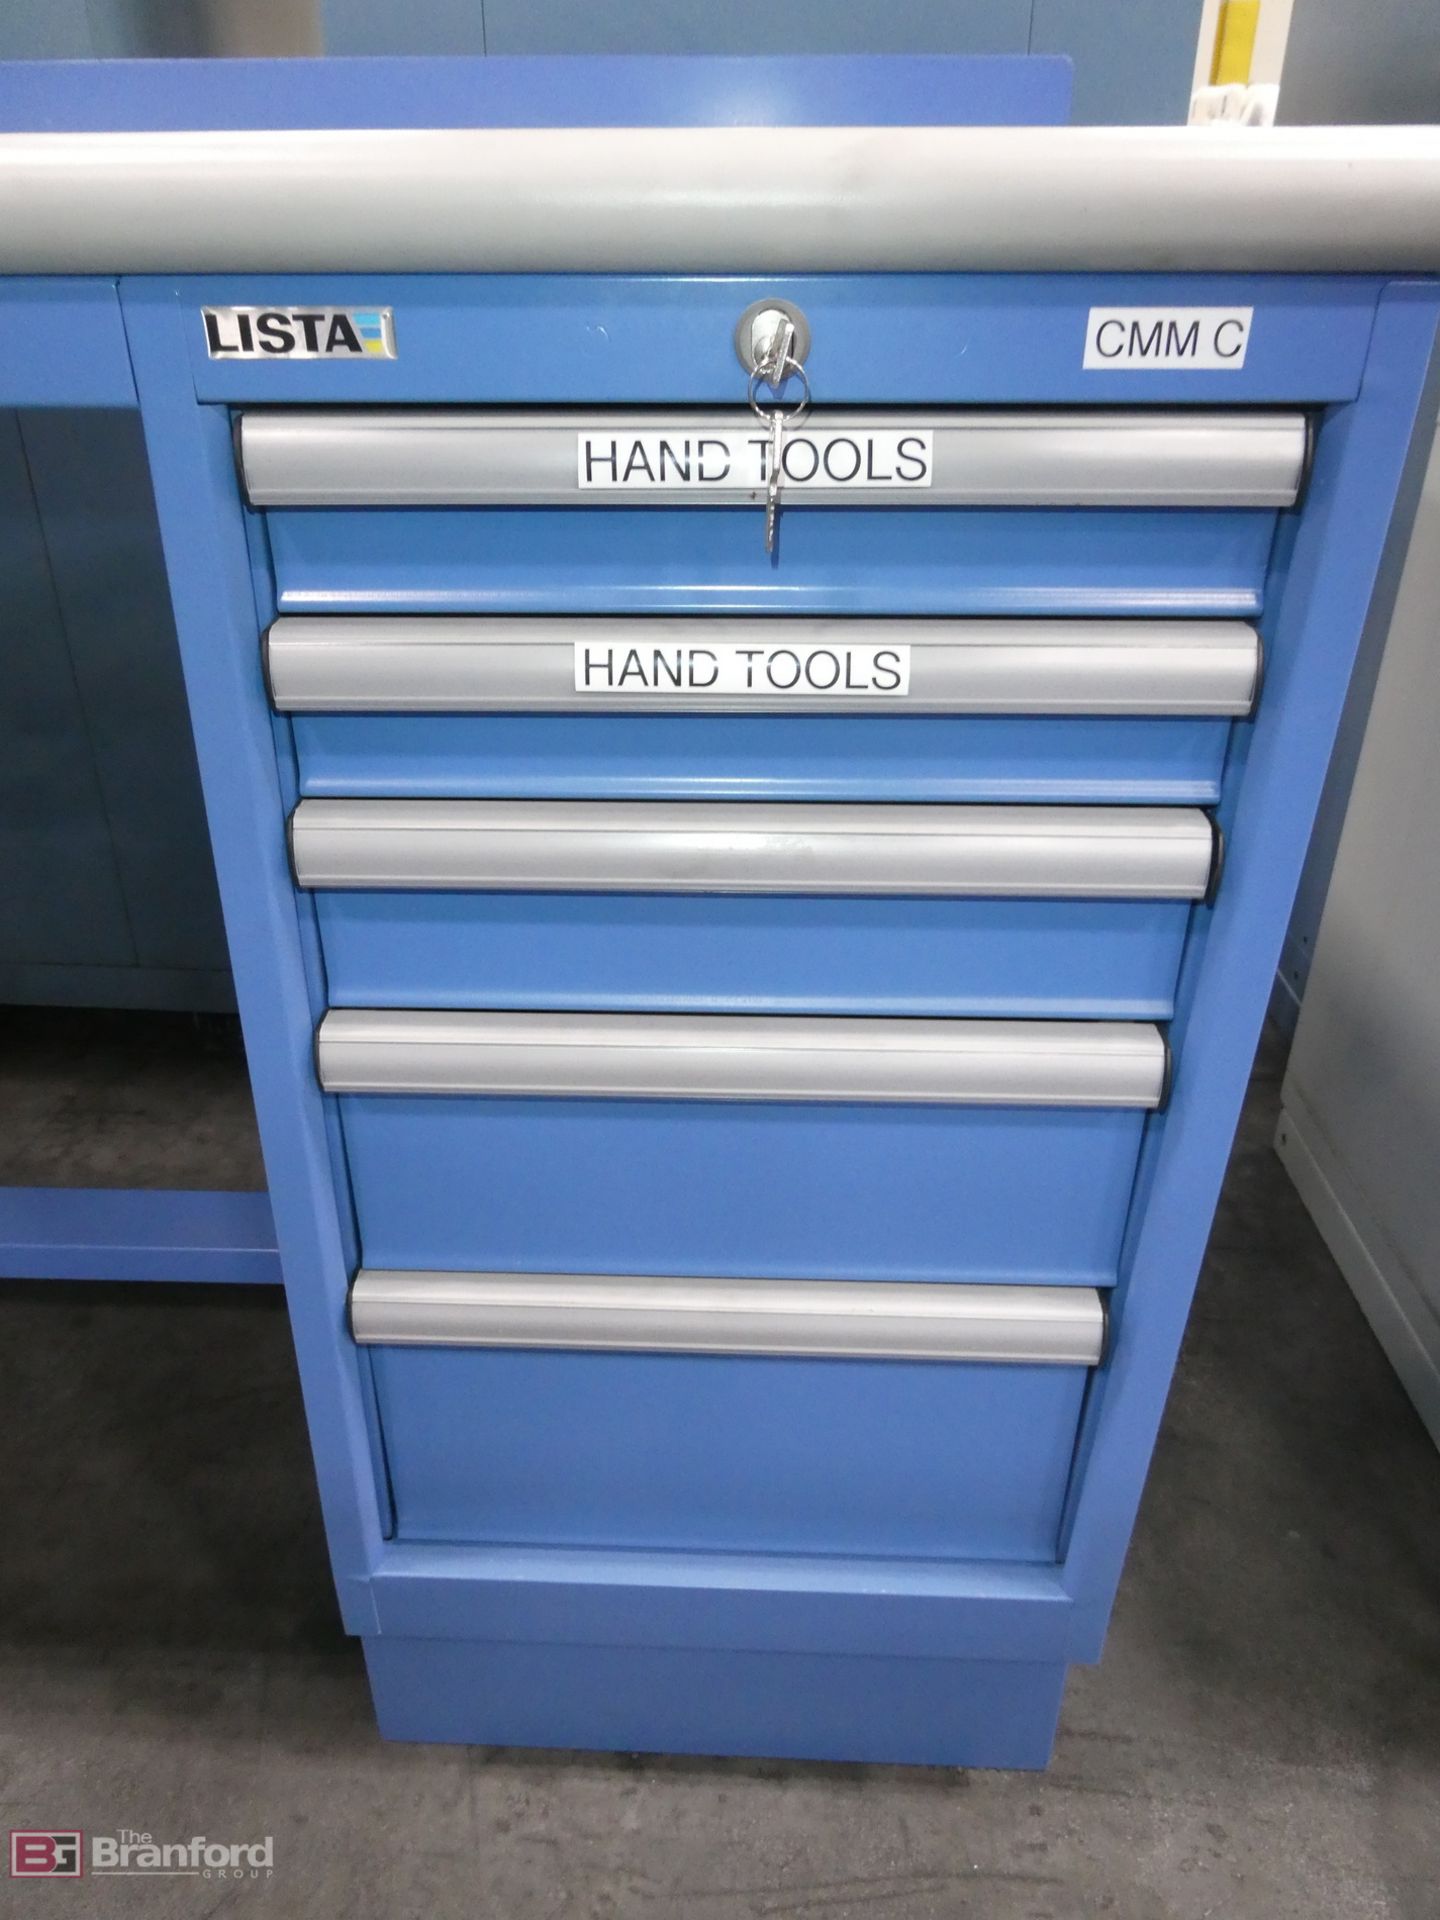 Lista Work Bench 30"x72" w/ 5-Drawer Cabinet - Image 2 of 3